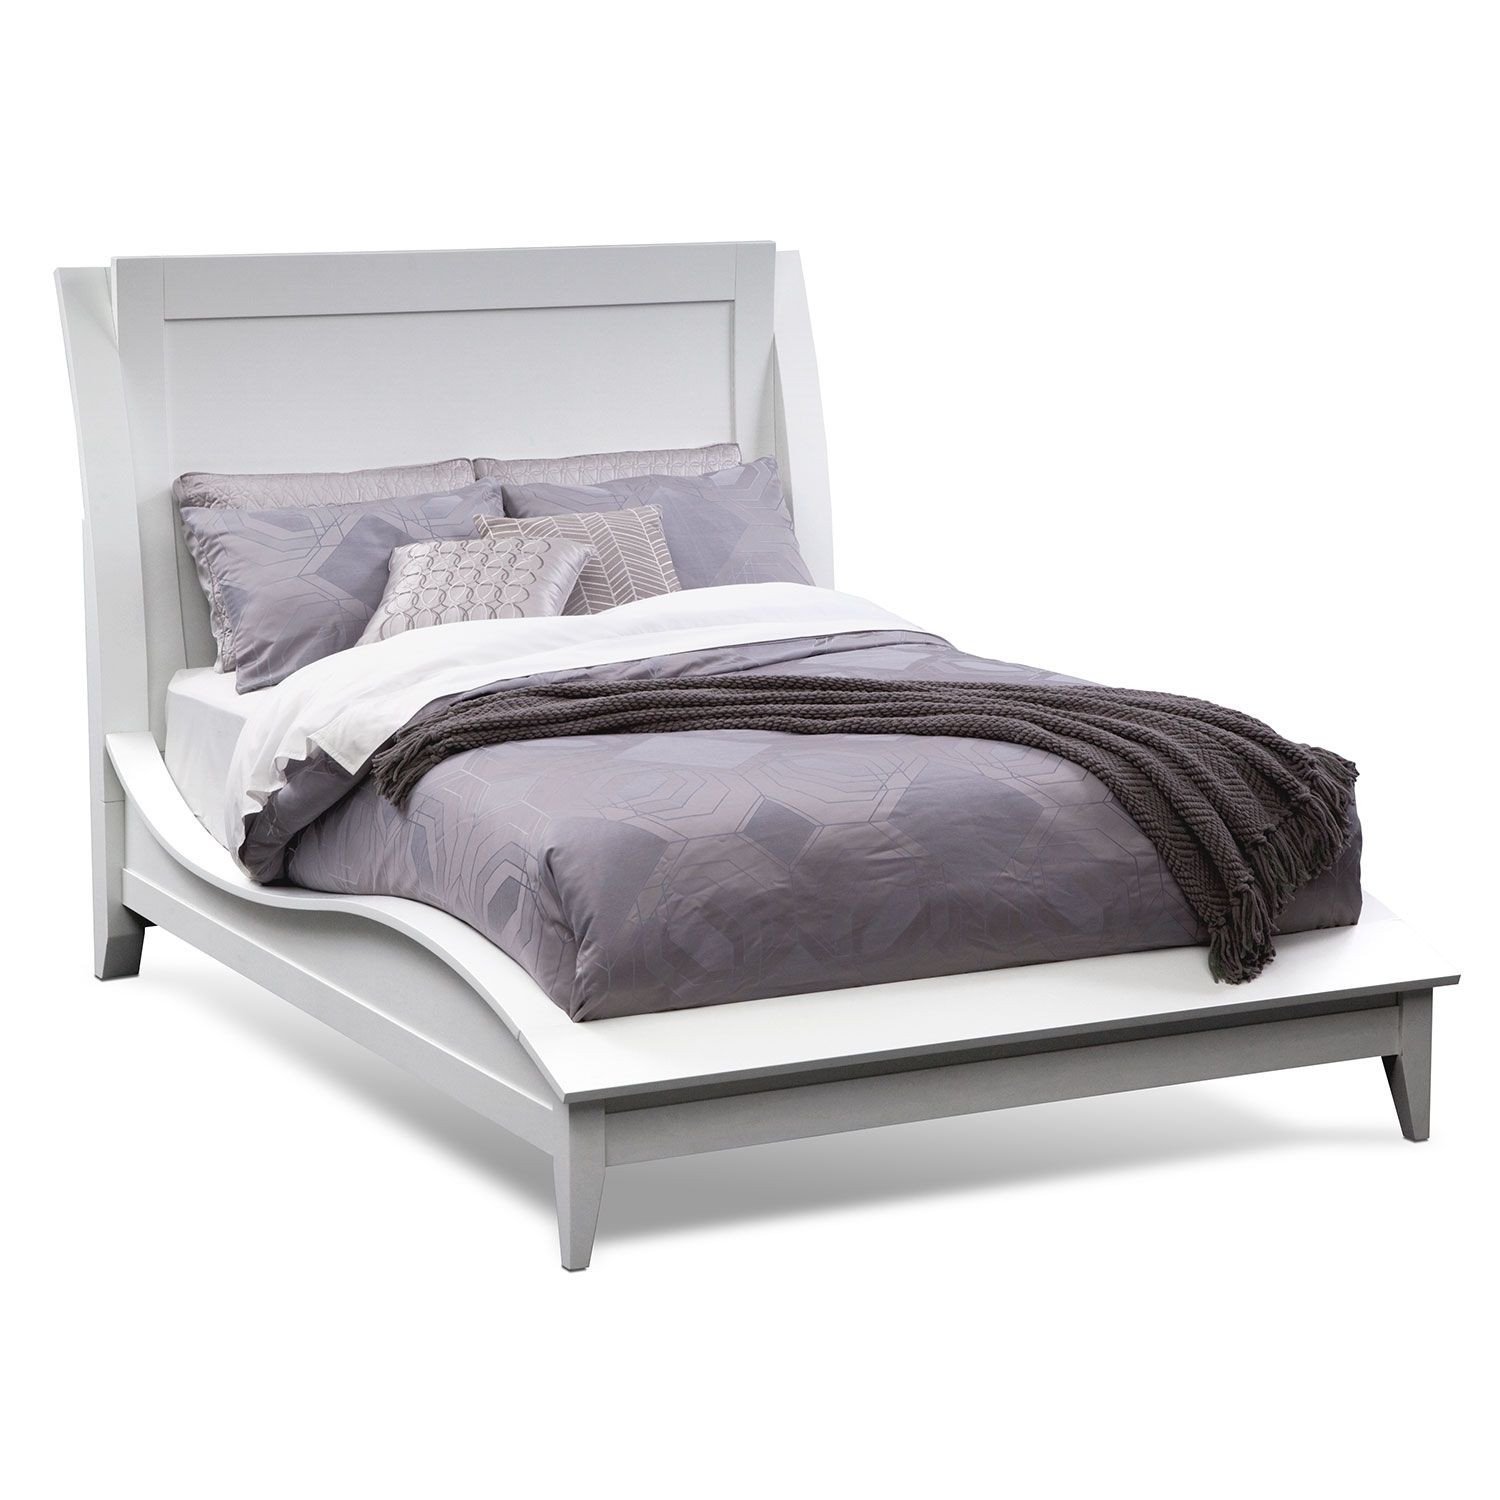 Value City Bedroom Set Awesome Bedroom Furniture Cascade White Queen Bed